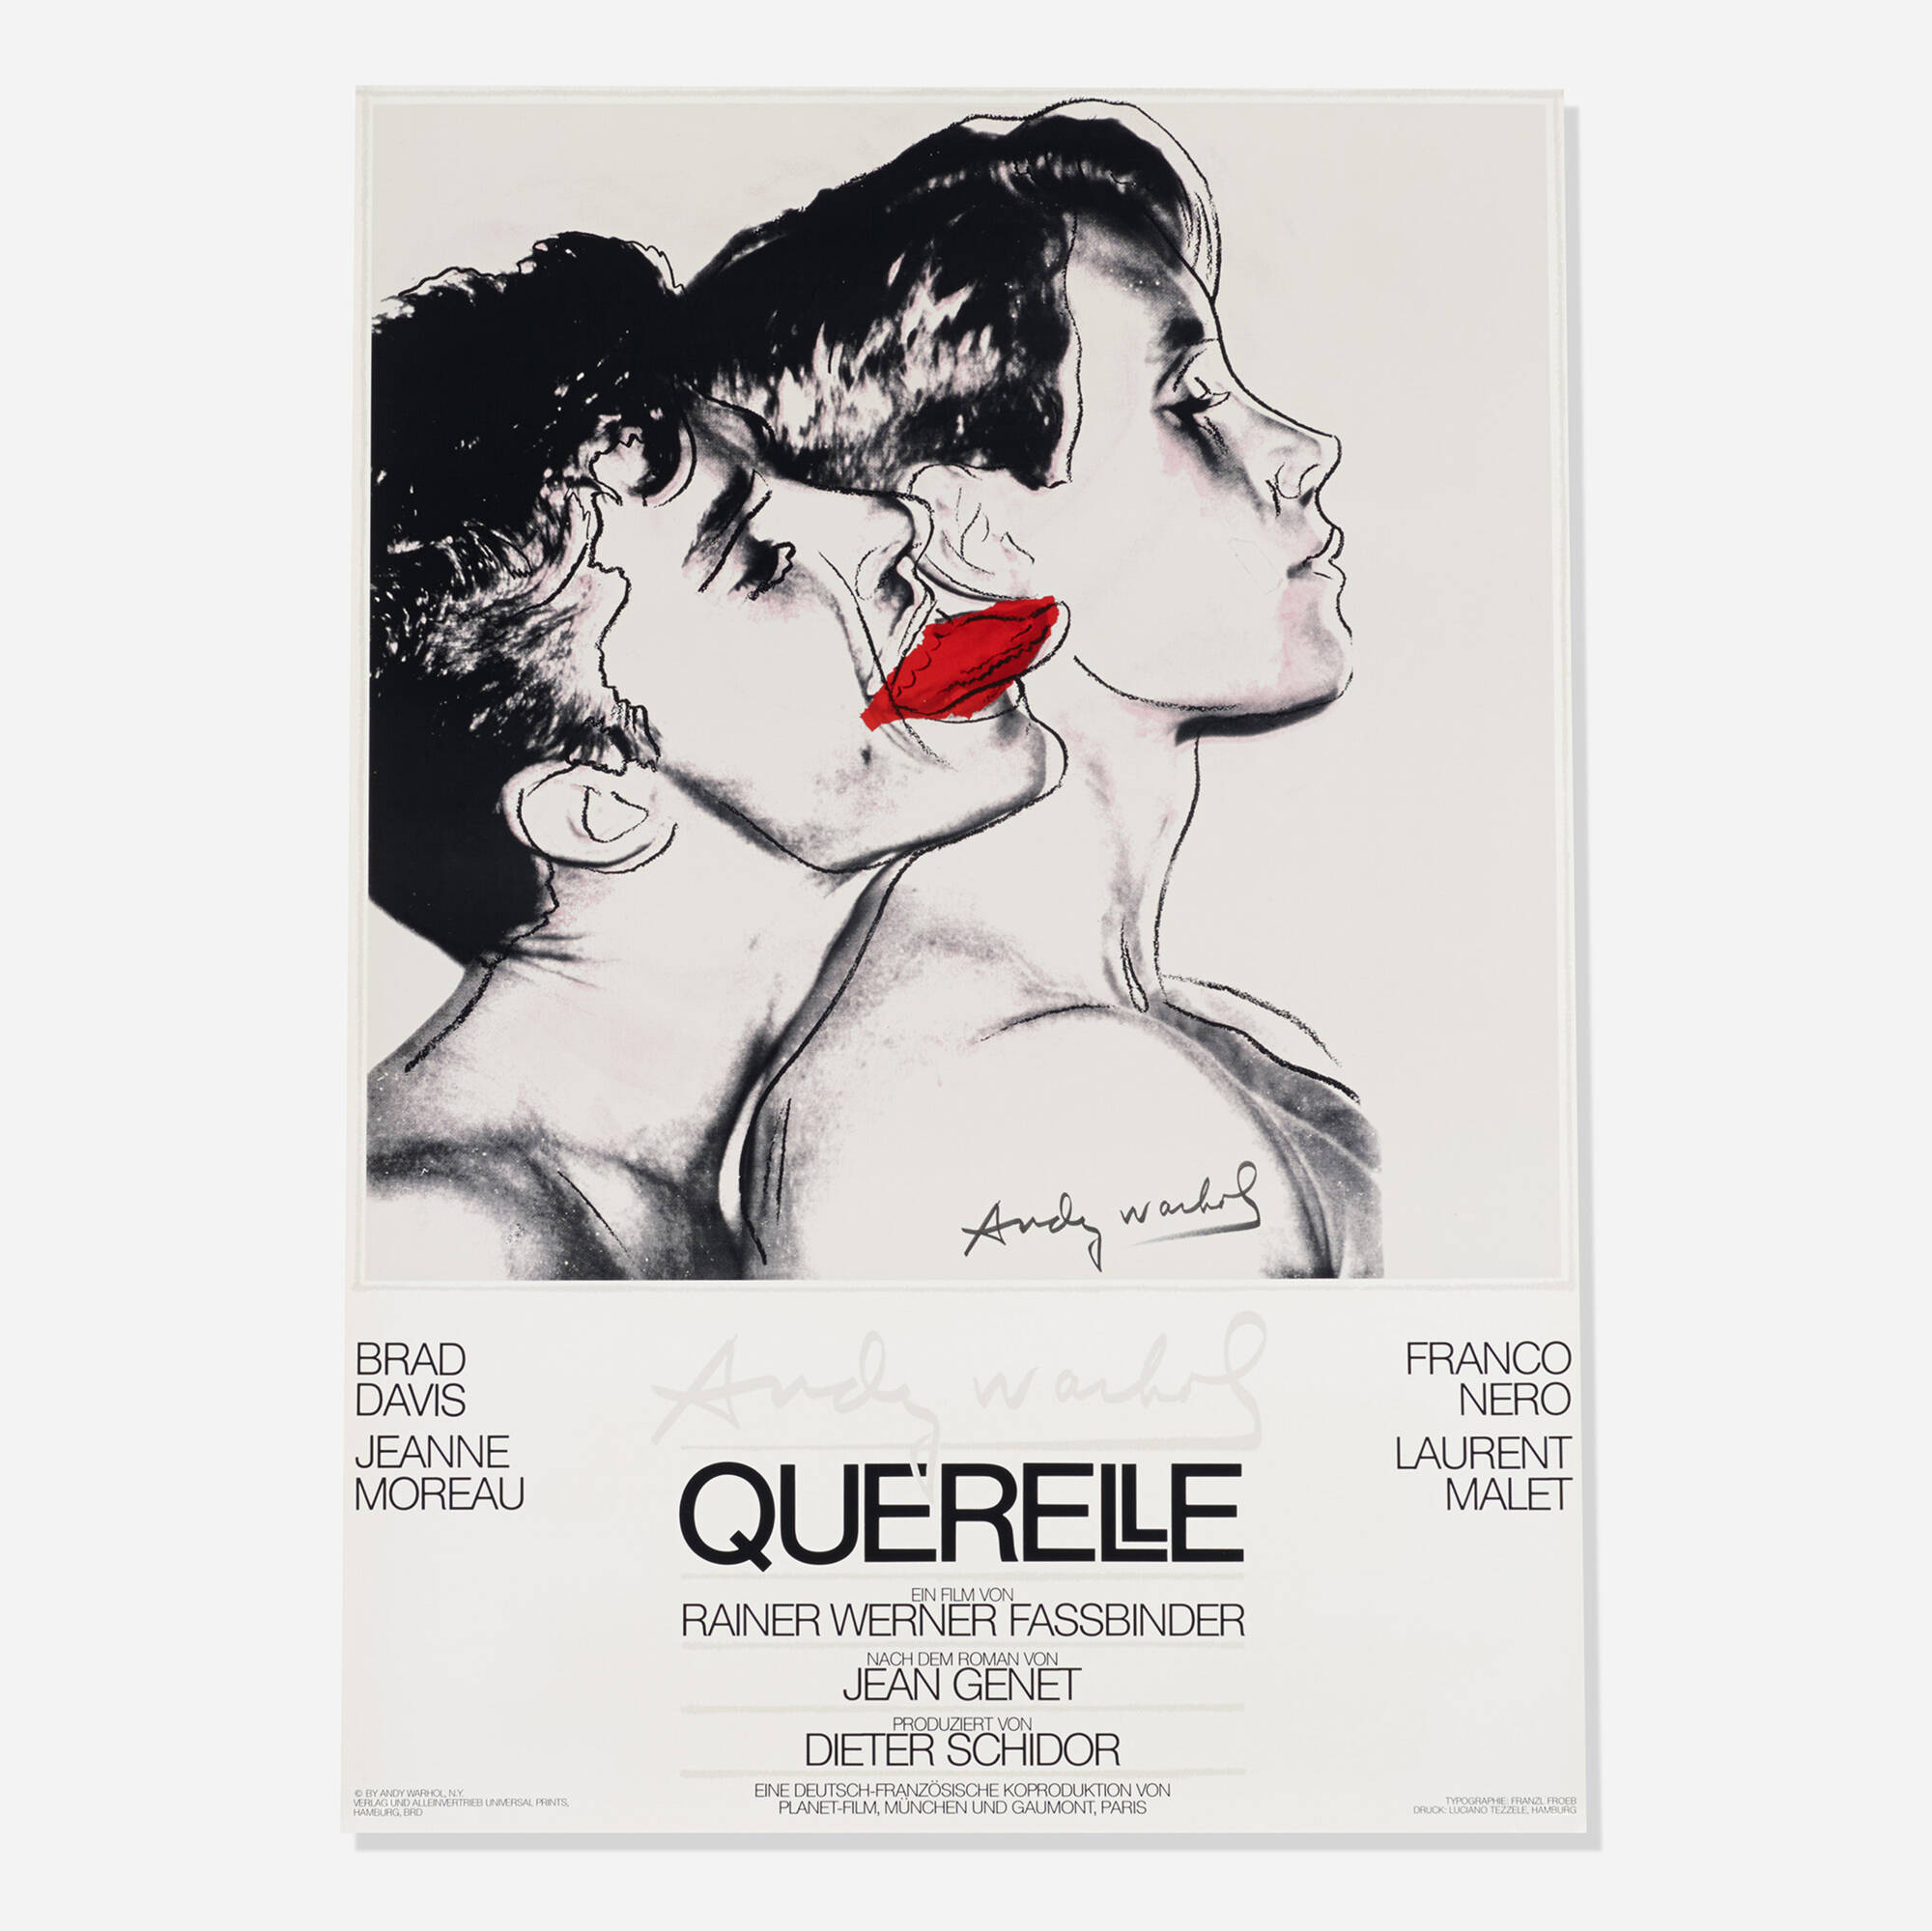 568: Andy Warhol / Querelle posters, set of three (2 of 5) .